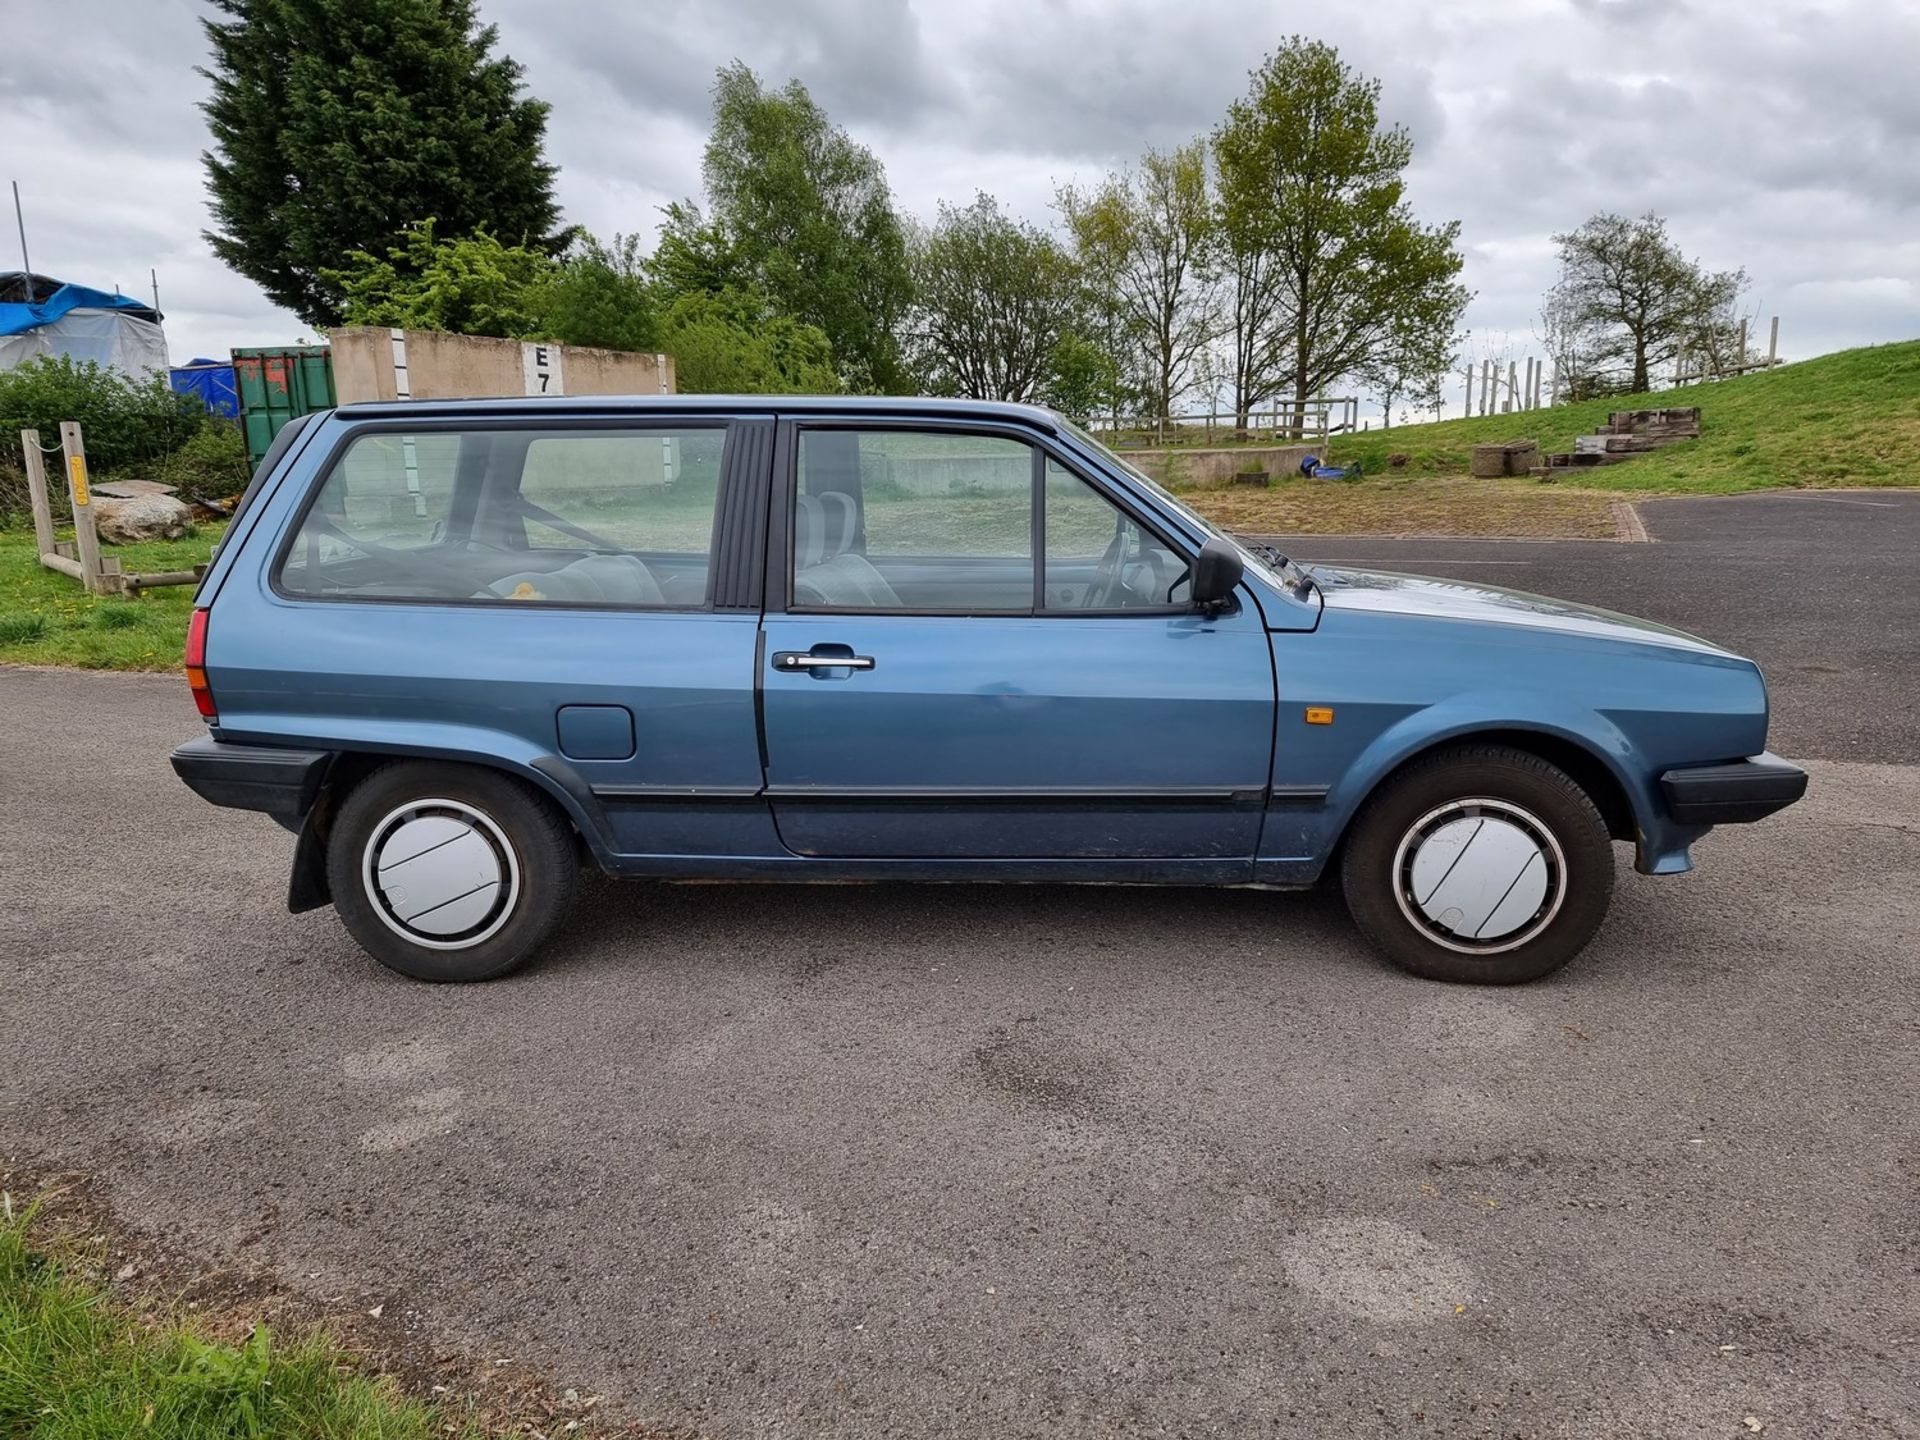 1989 VW Polo Mk2, 1272cc. Registration number G775 MKH. Chassis number WVWZZZ80ZKW168973. Engine - Image 7 of 16